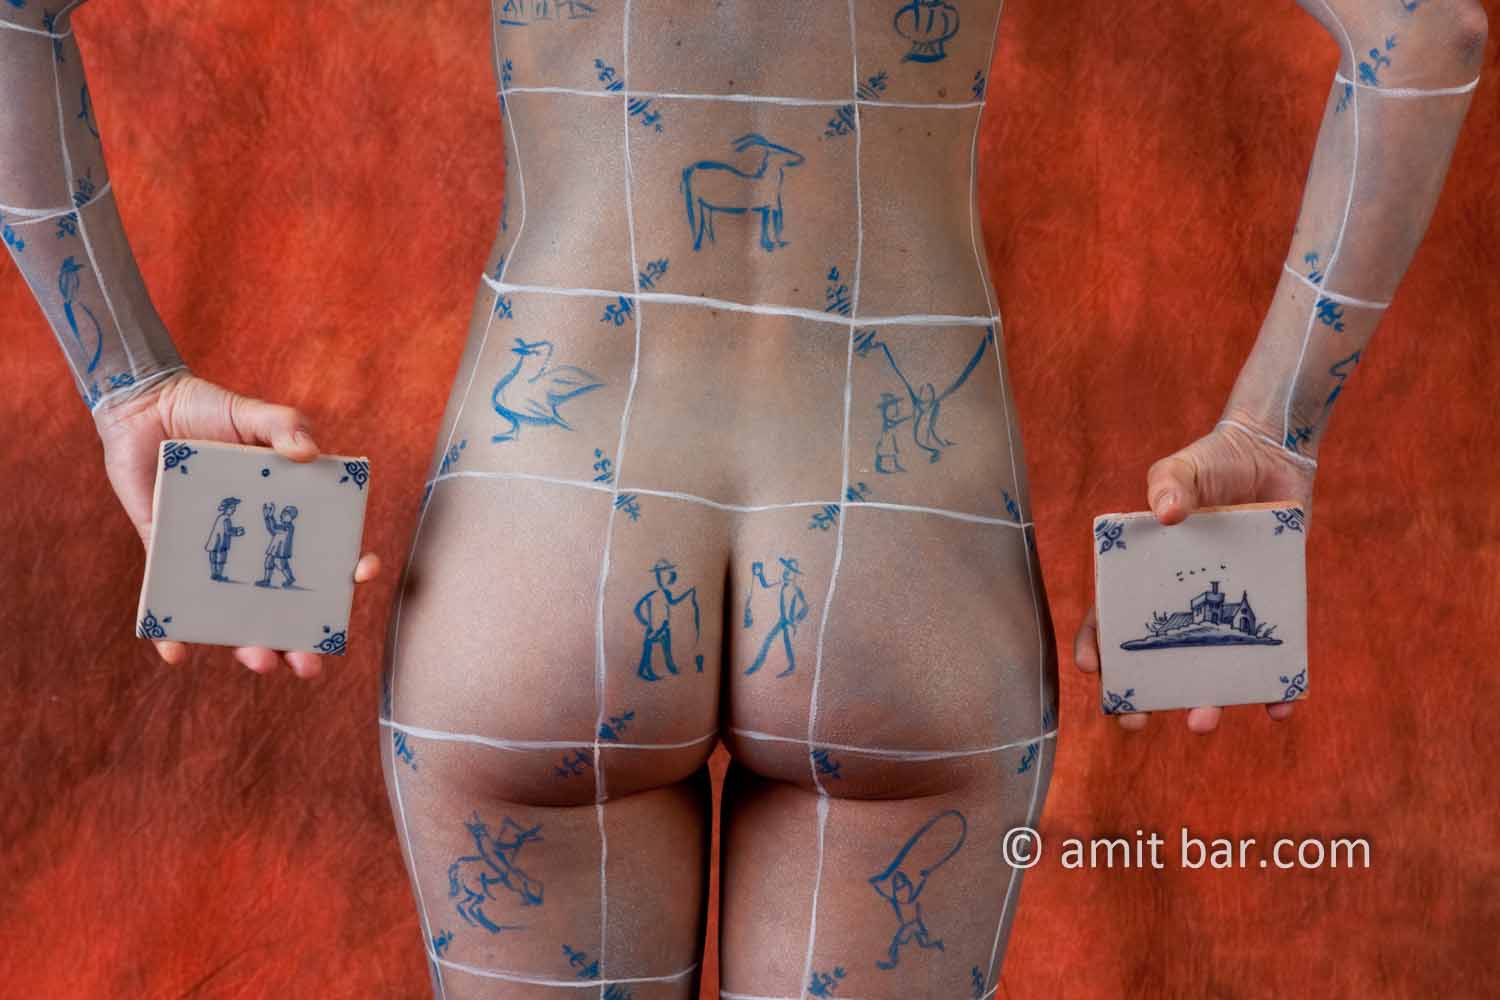 Delft blue II: Body-painted model with Delft blue tiles